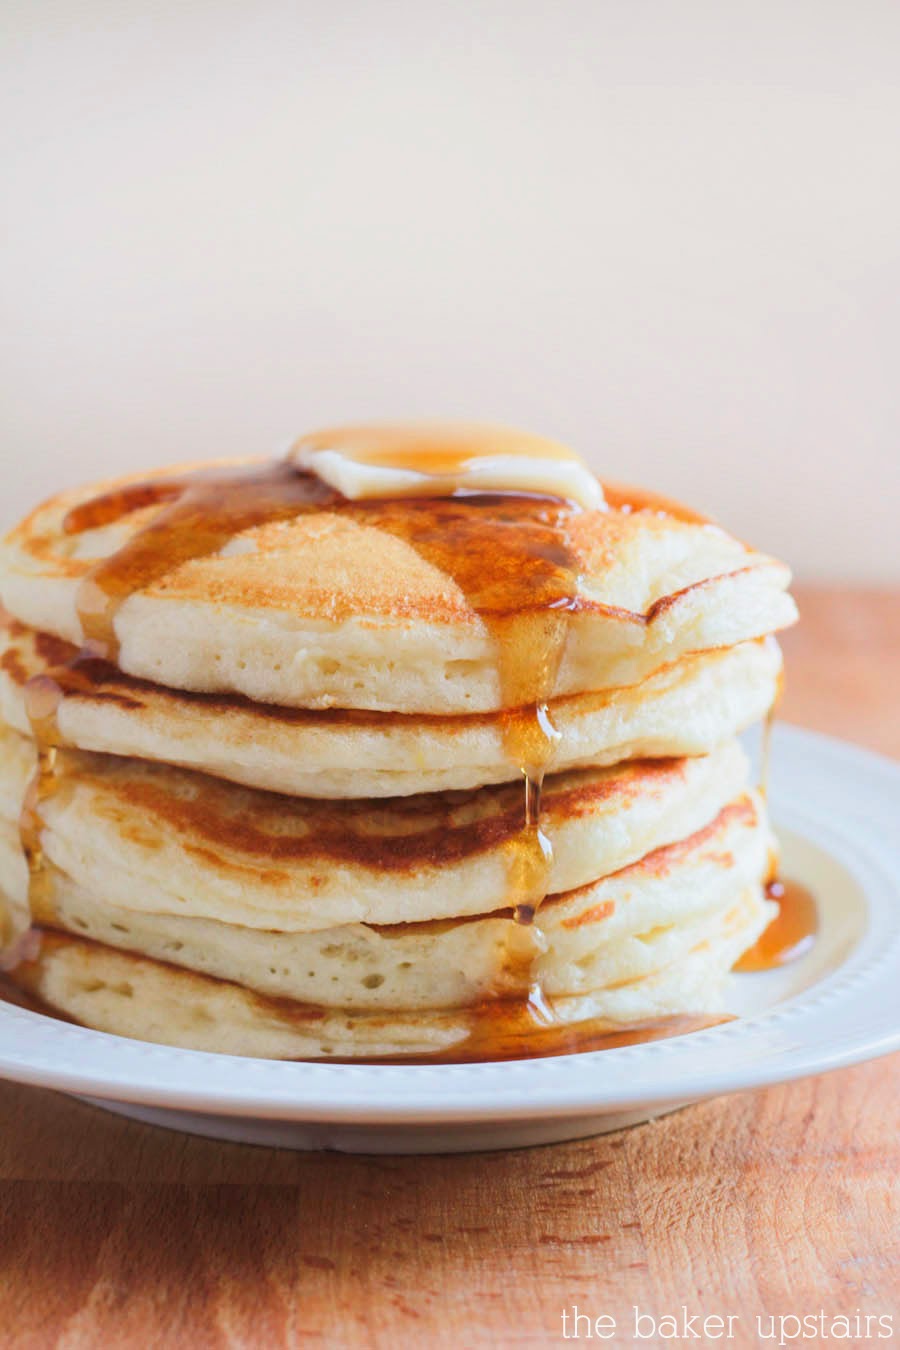 These light and fluffy perfect pancakes are the best! The recipe is simple and easy to make, and the pancakes turn out great every time!